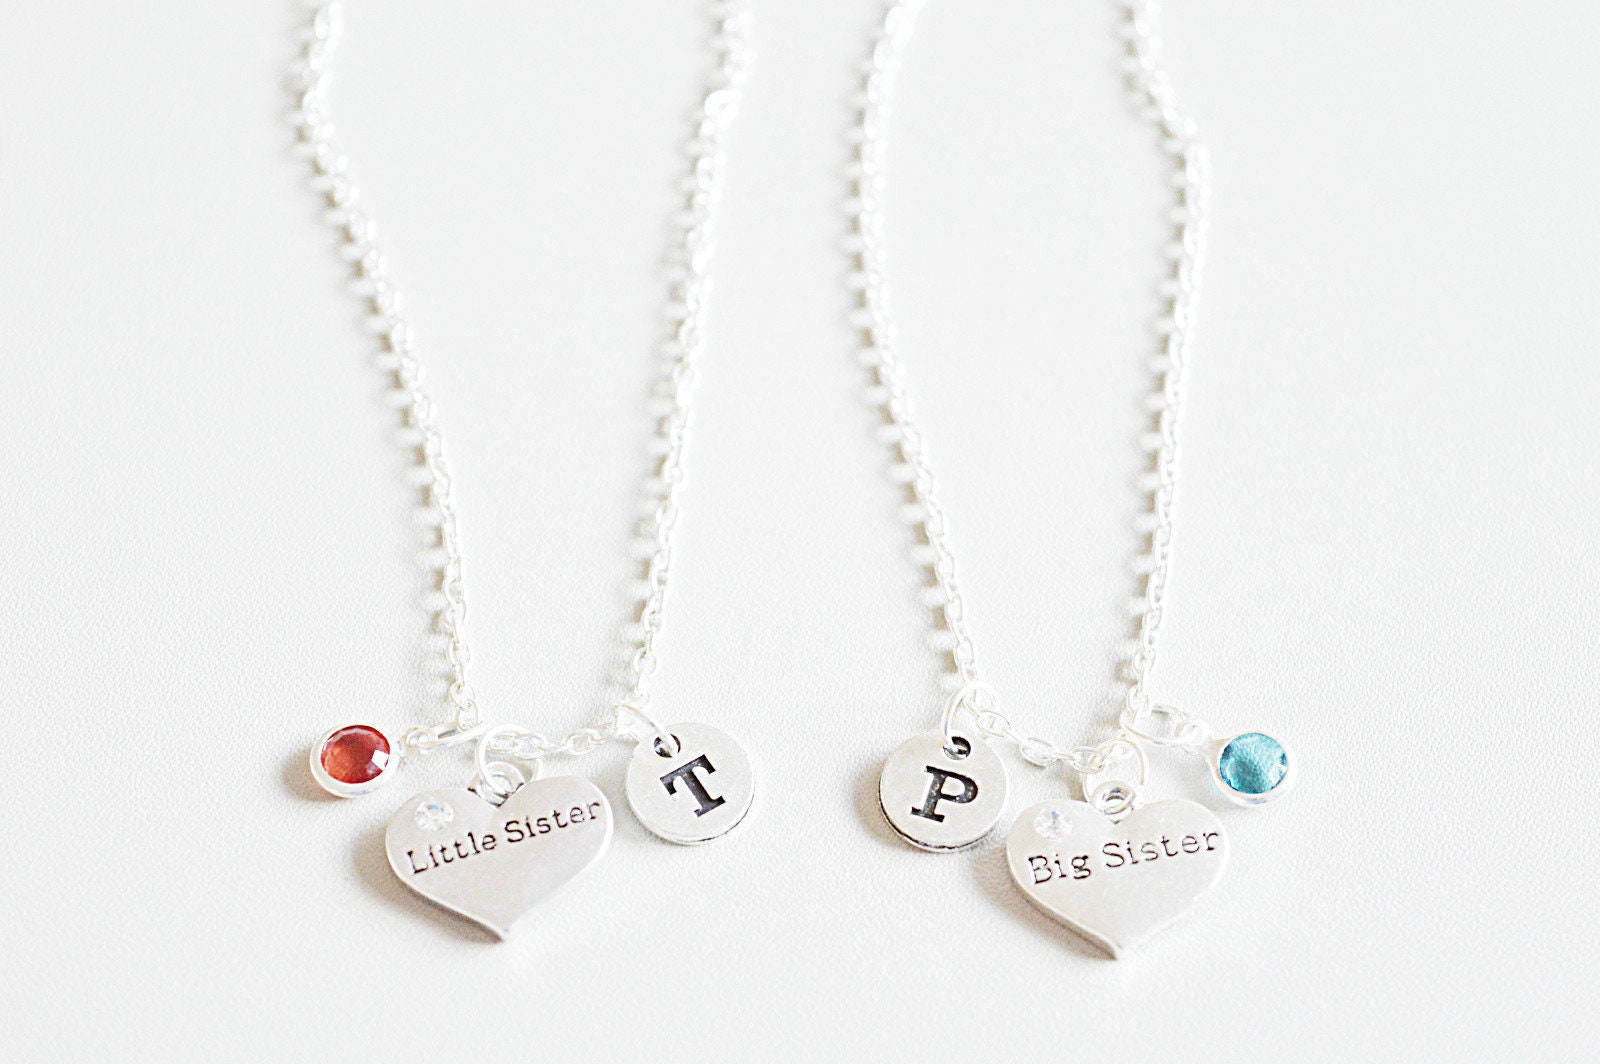 Sister Necklaces, Sister Necklace set of 2, Big sister little sister,Sisters Necklaces,Gifts for sister,Schwester armband,Big sis little sis